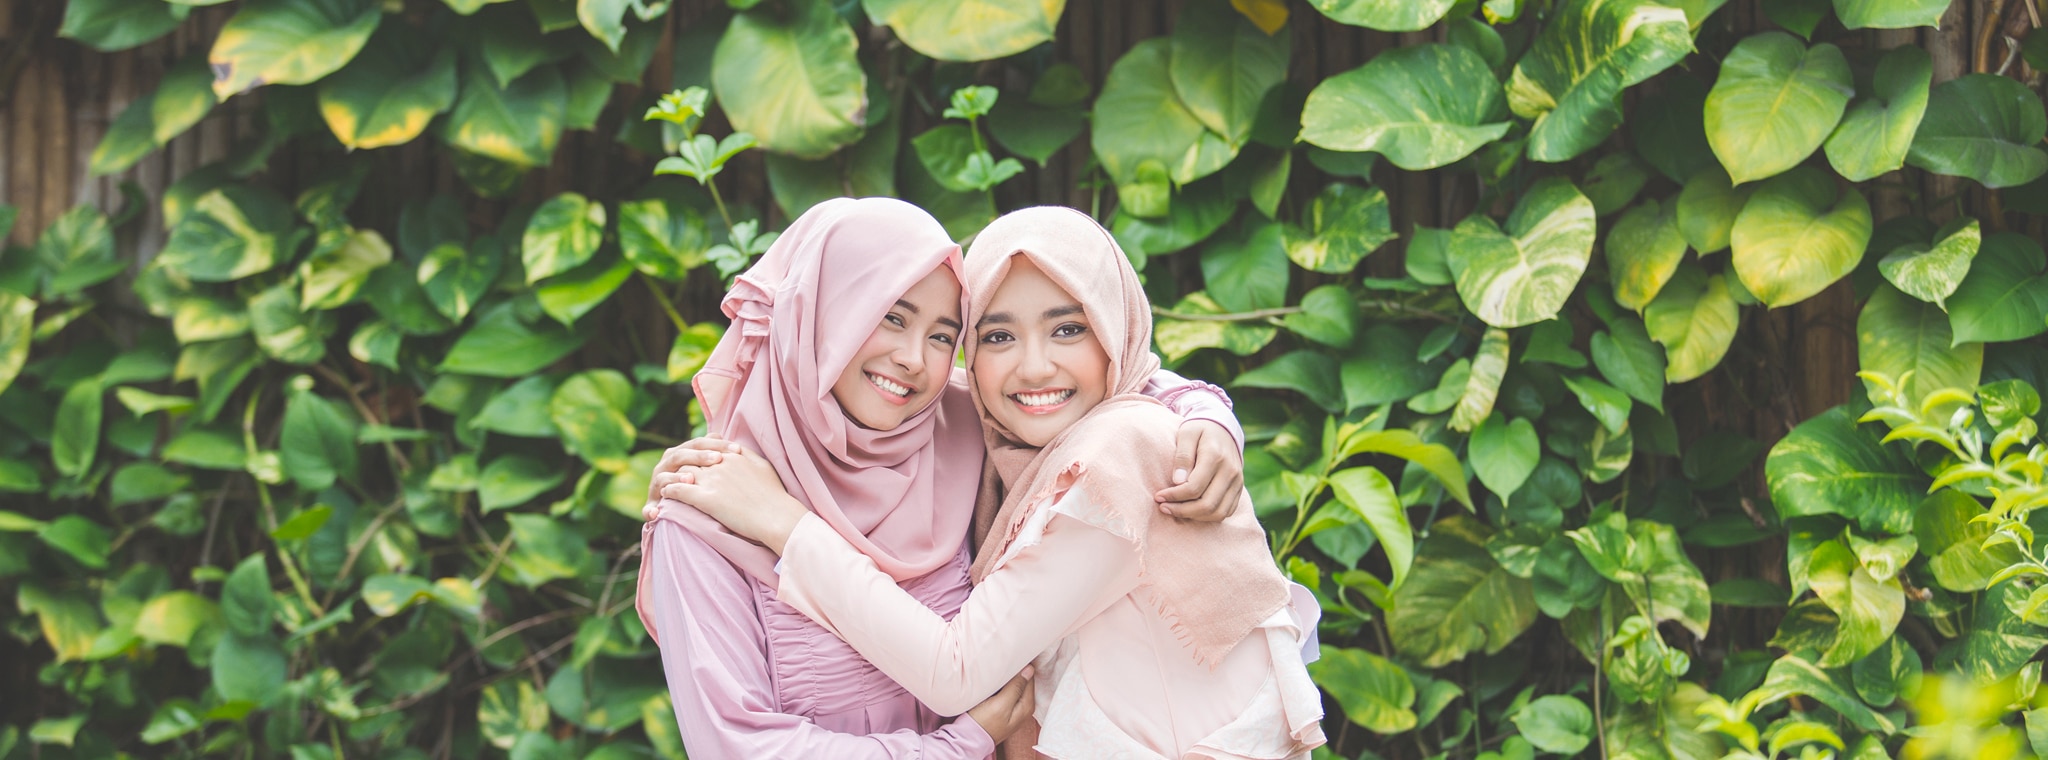 Two woman wearing hijabs, hugging each other